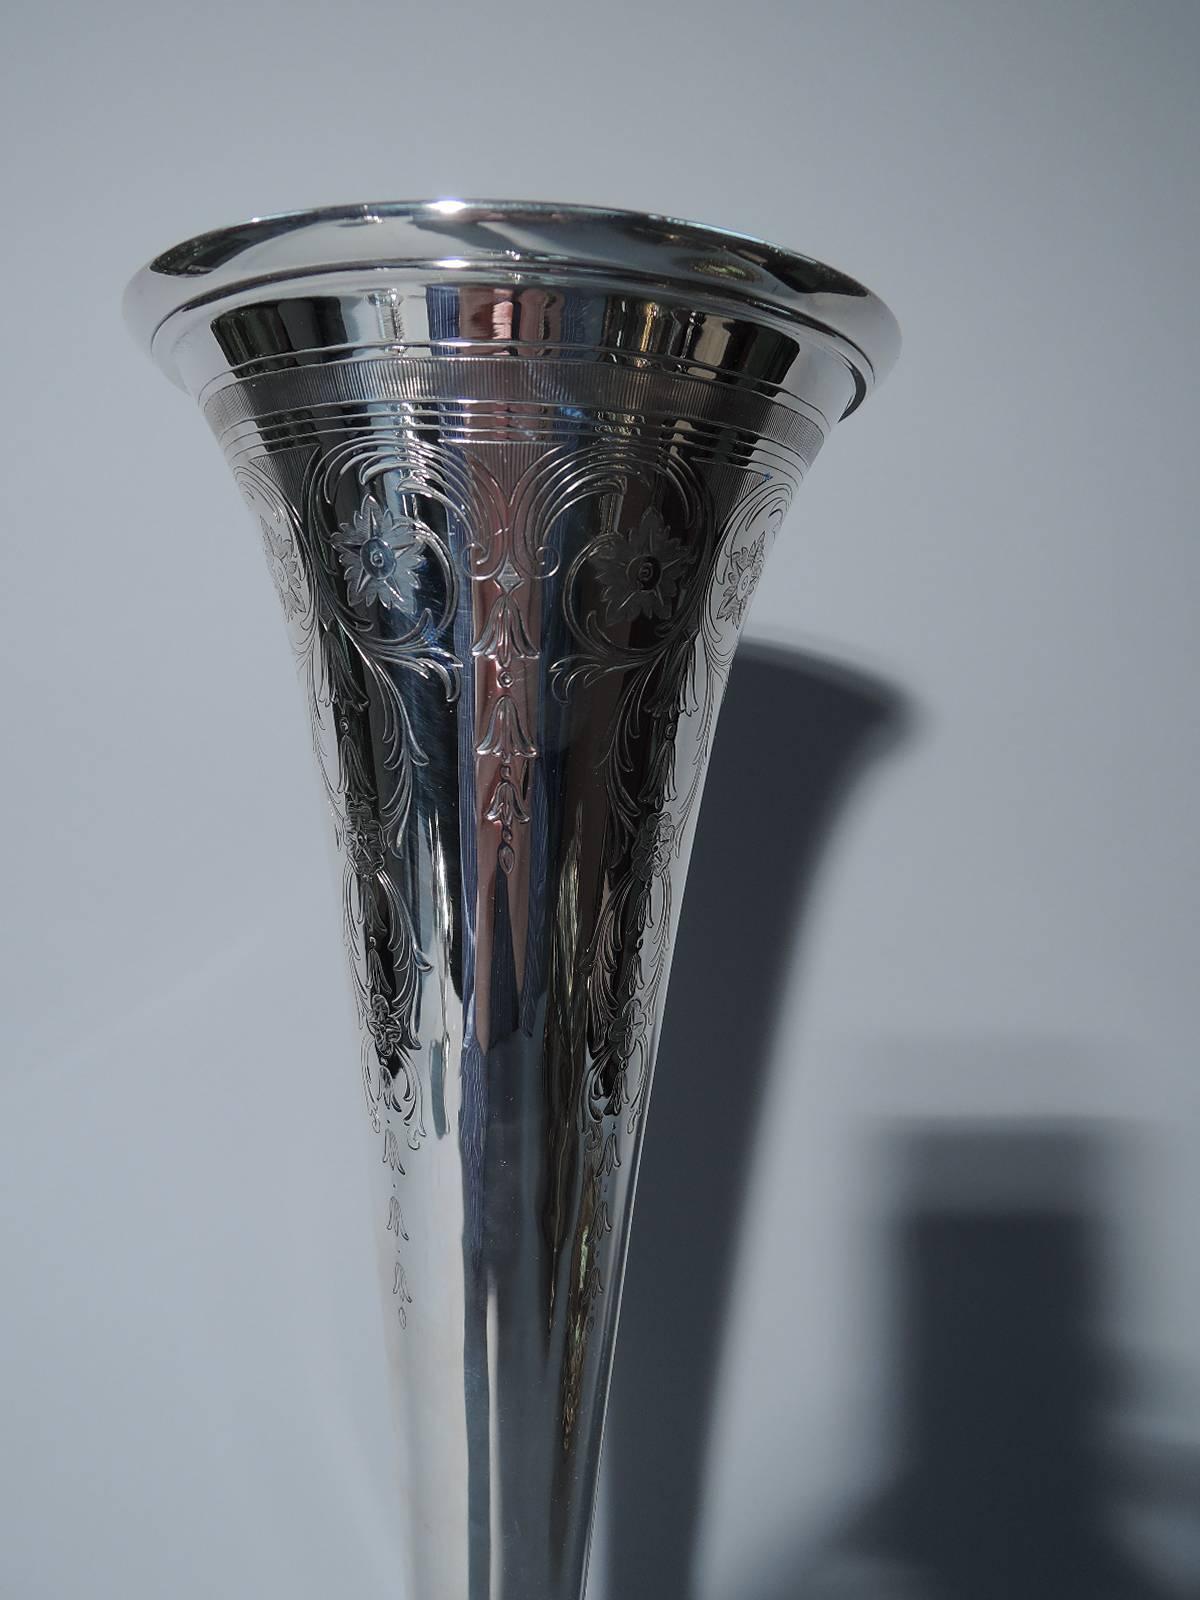 Art Nouveau sterling silver trumpet vase. Made by Tiffany & Co. in New York, circa 1915. Base knop, stepped foot, and molded rim. Engraved at top vertical ornament in form of stylized flowers and foliage as well as linear band and triangular frames.